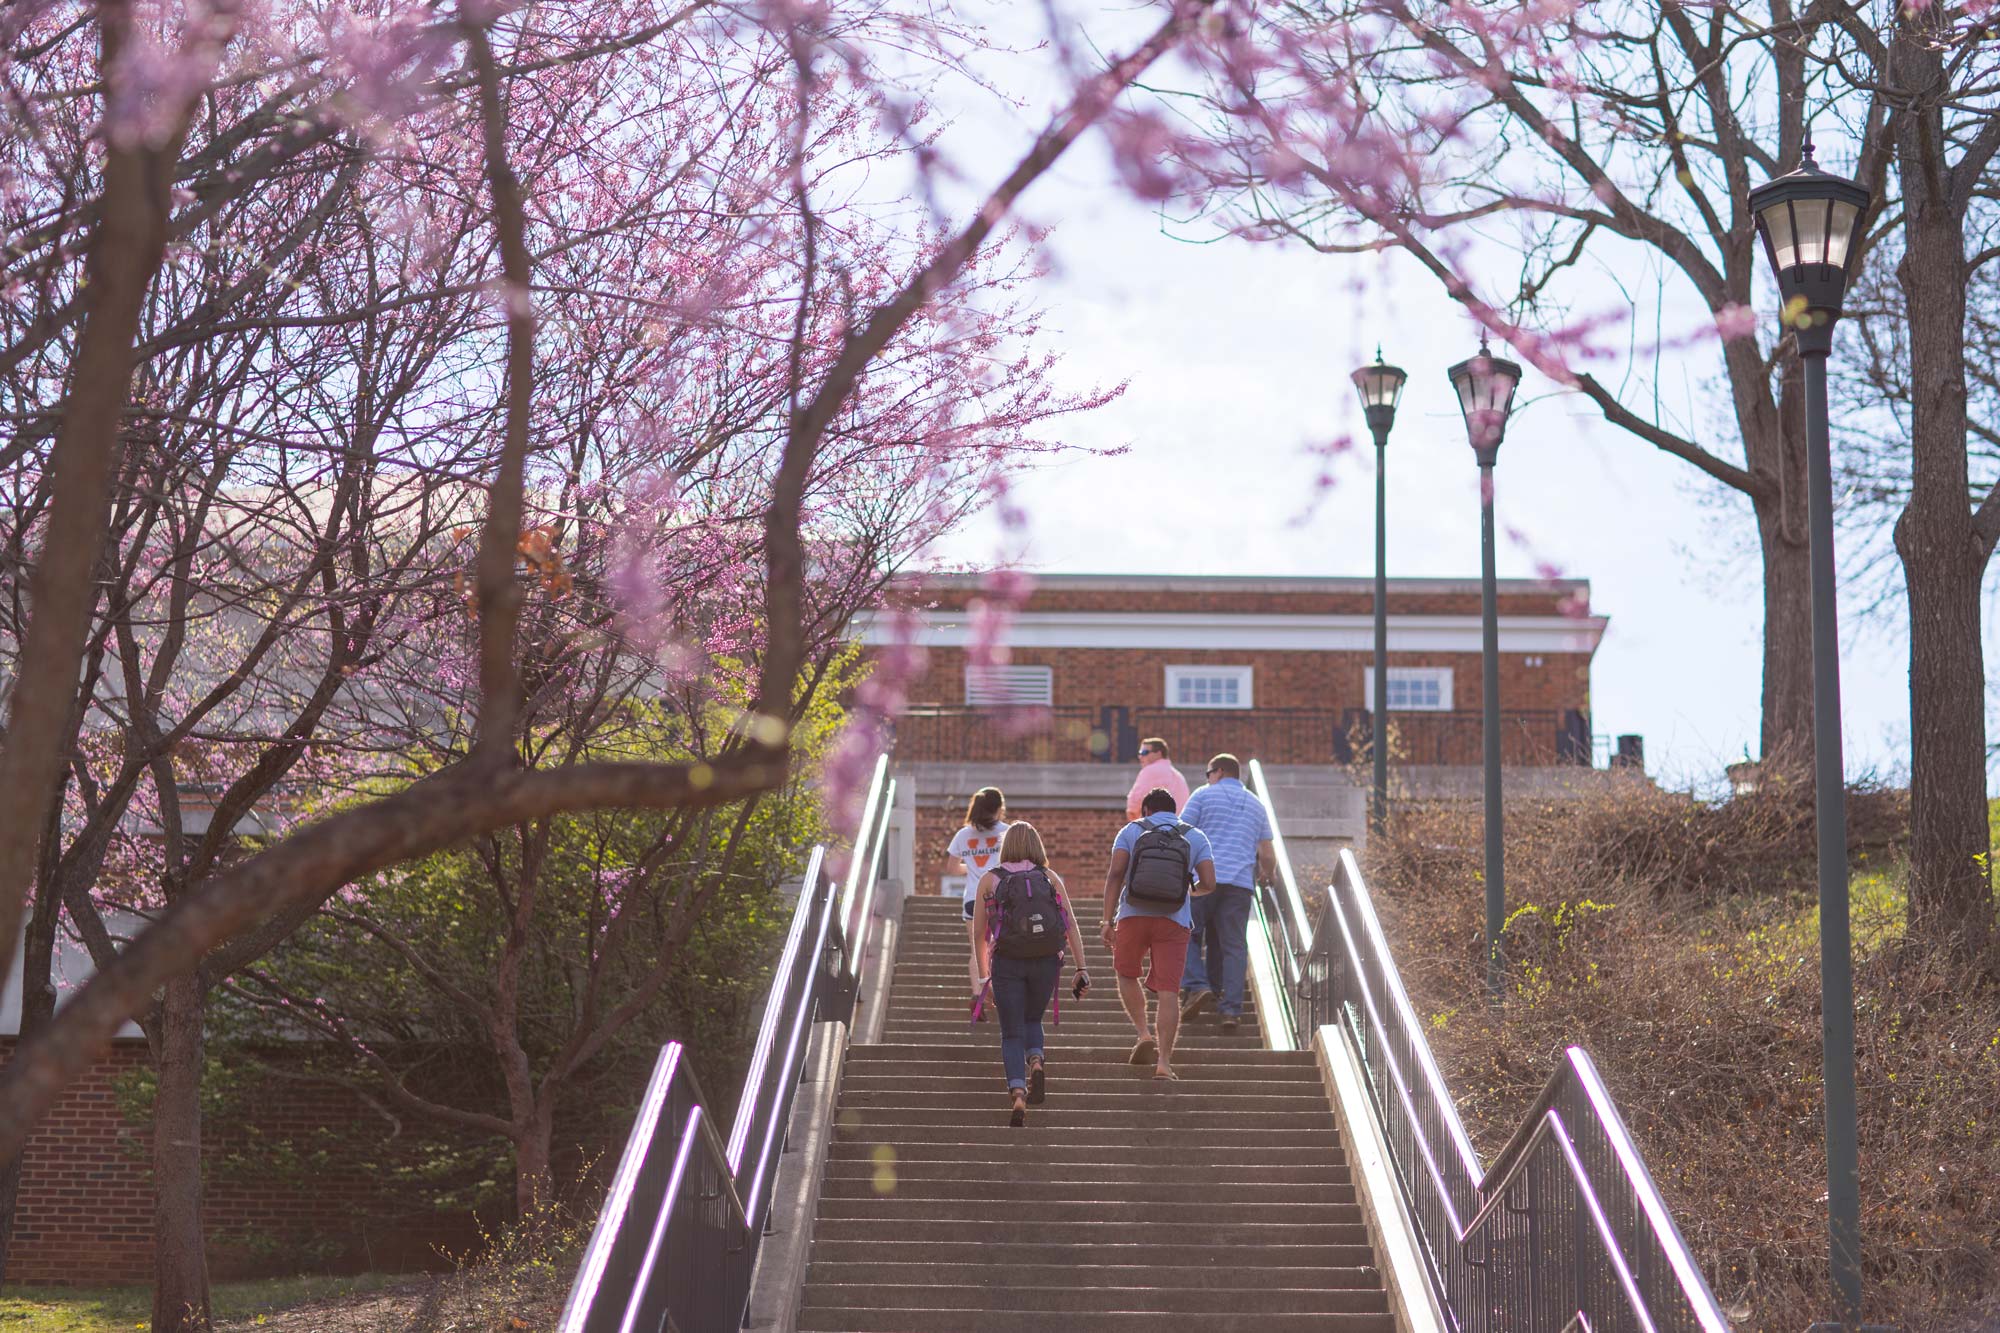 Students walking up an outdoor flight of stairs